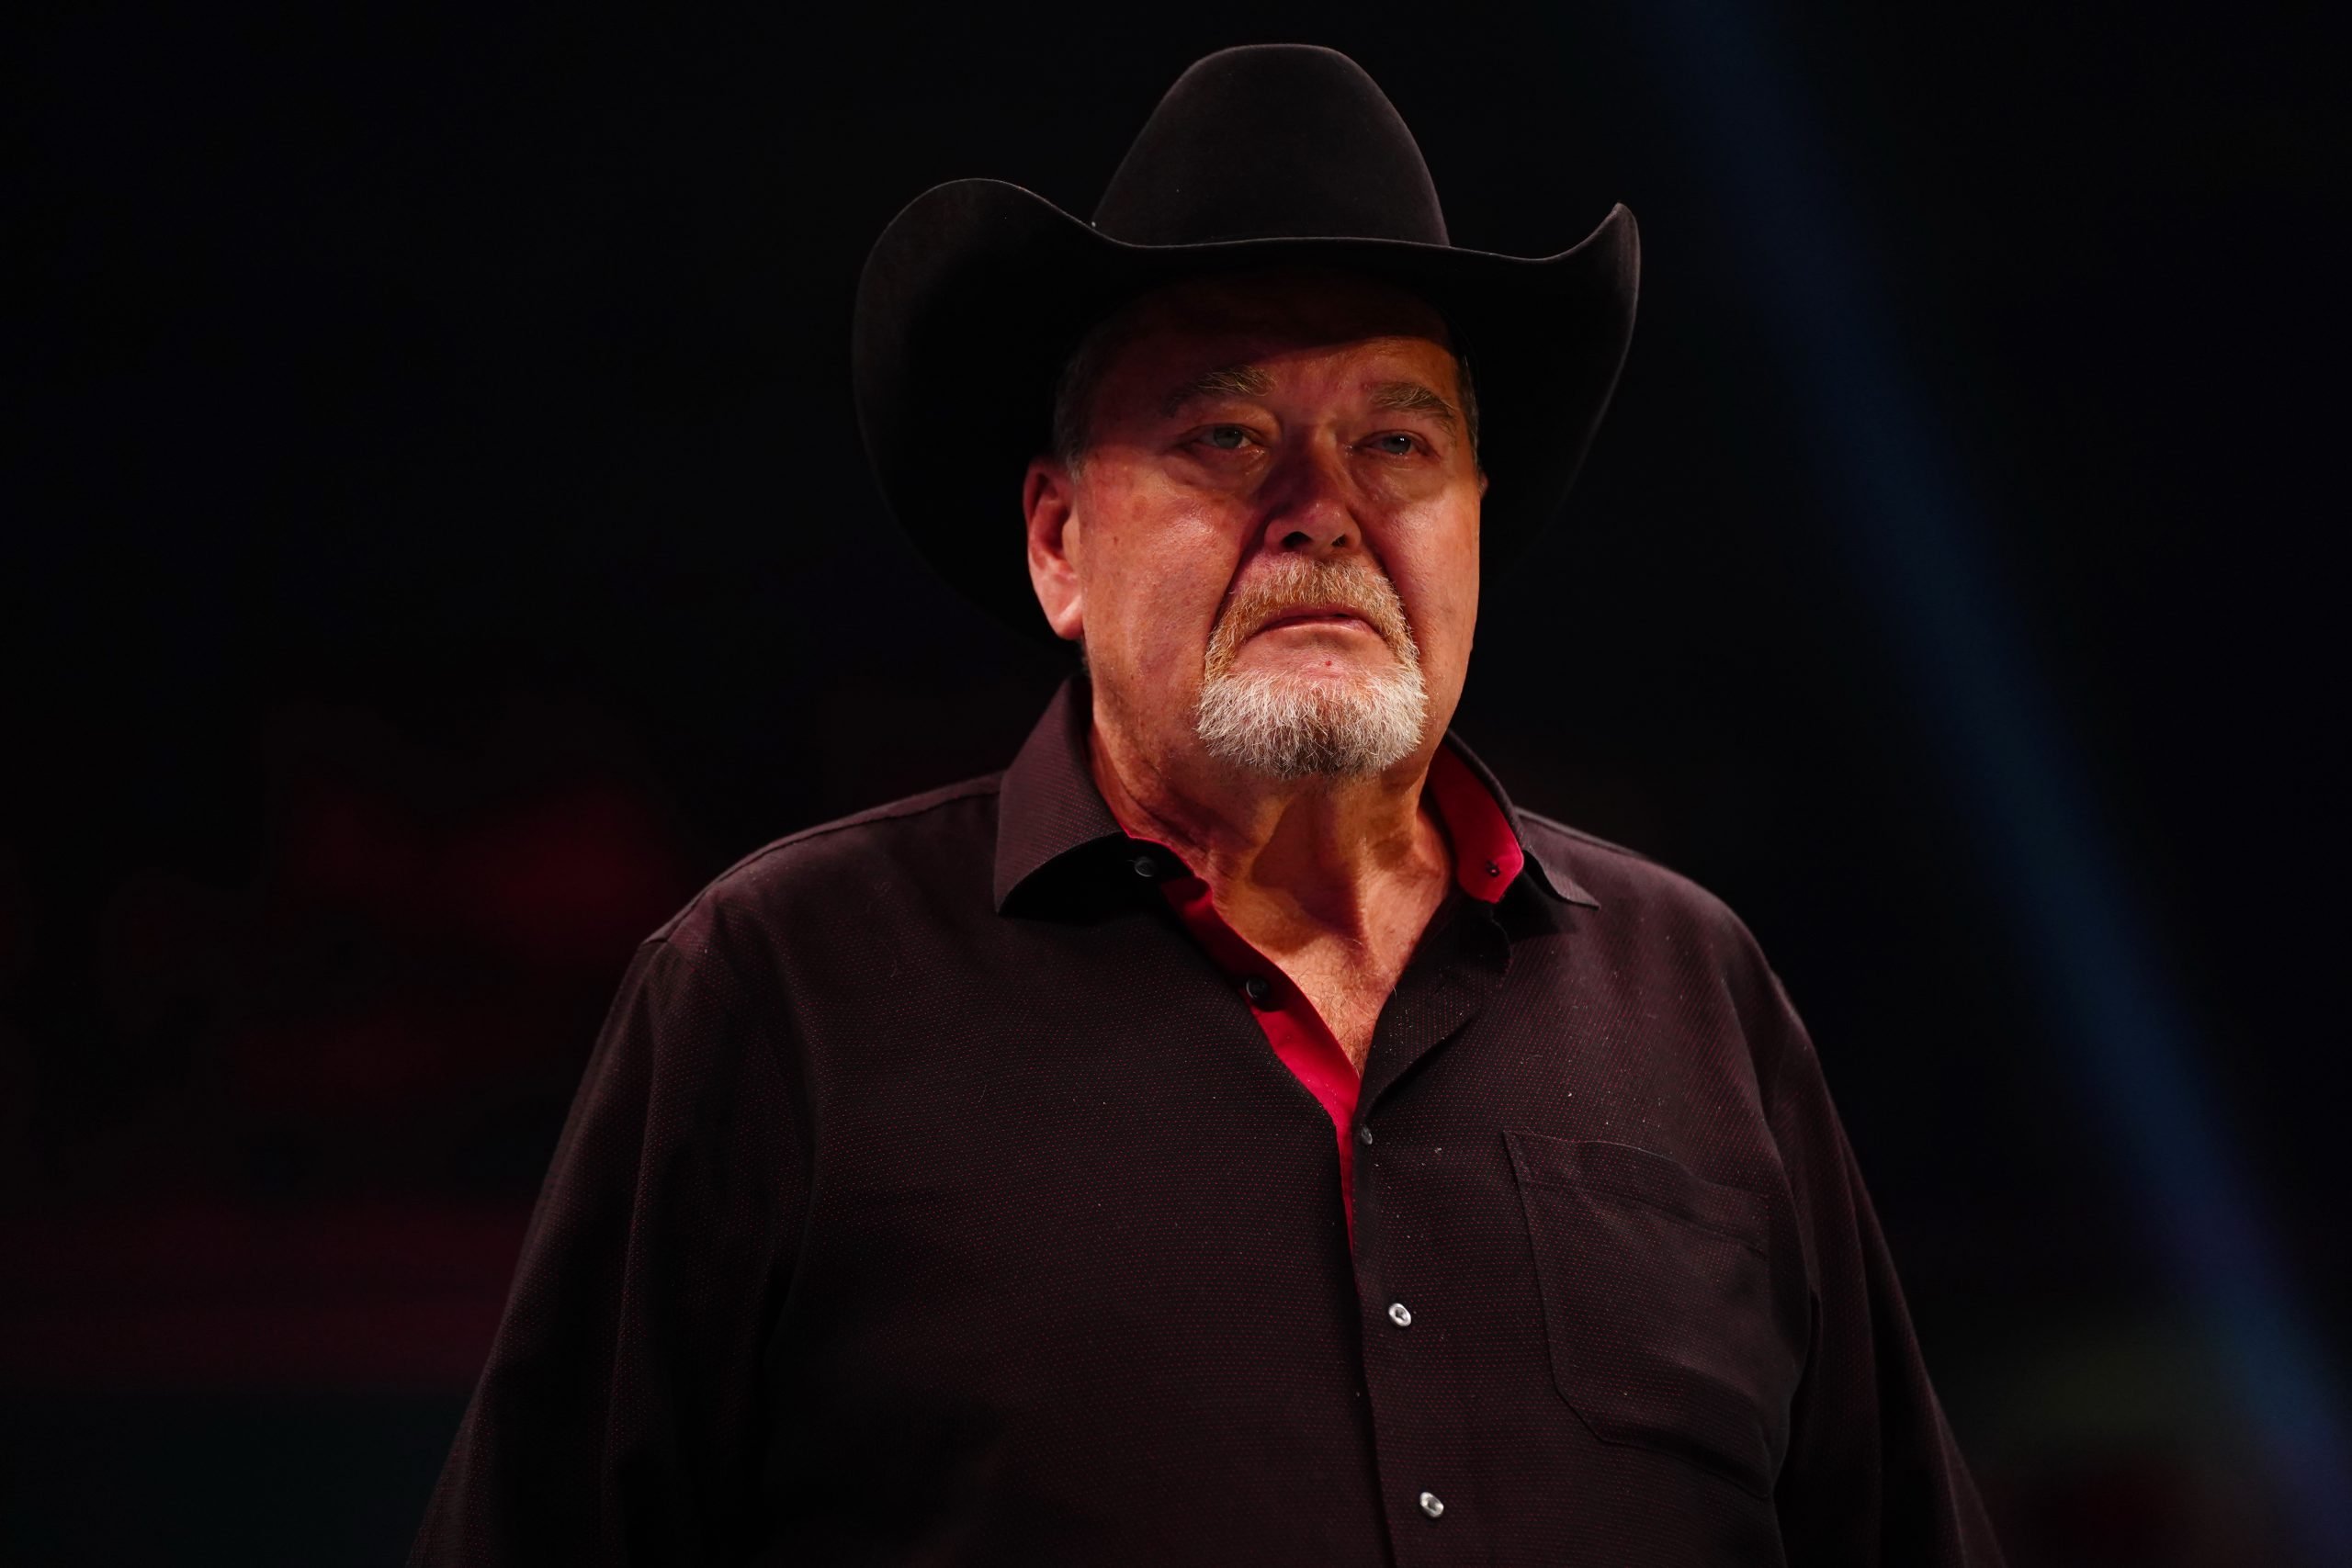 New Book by Jim Ross Set to Release in May